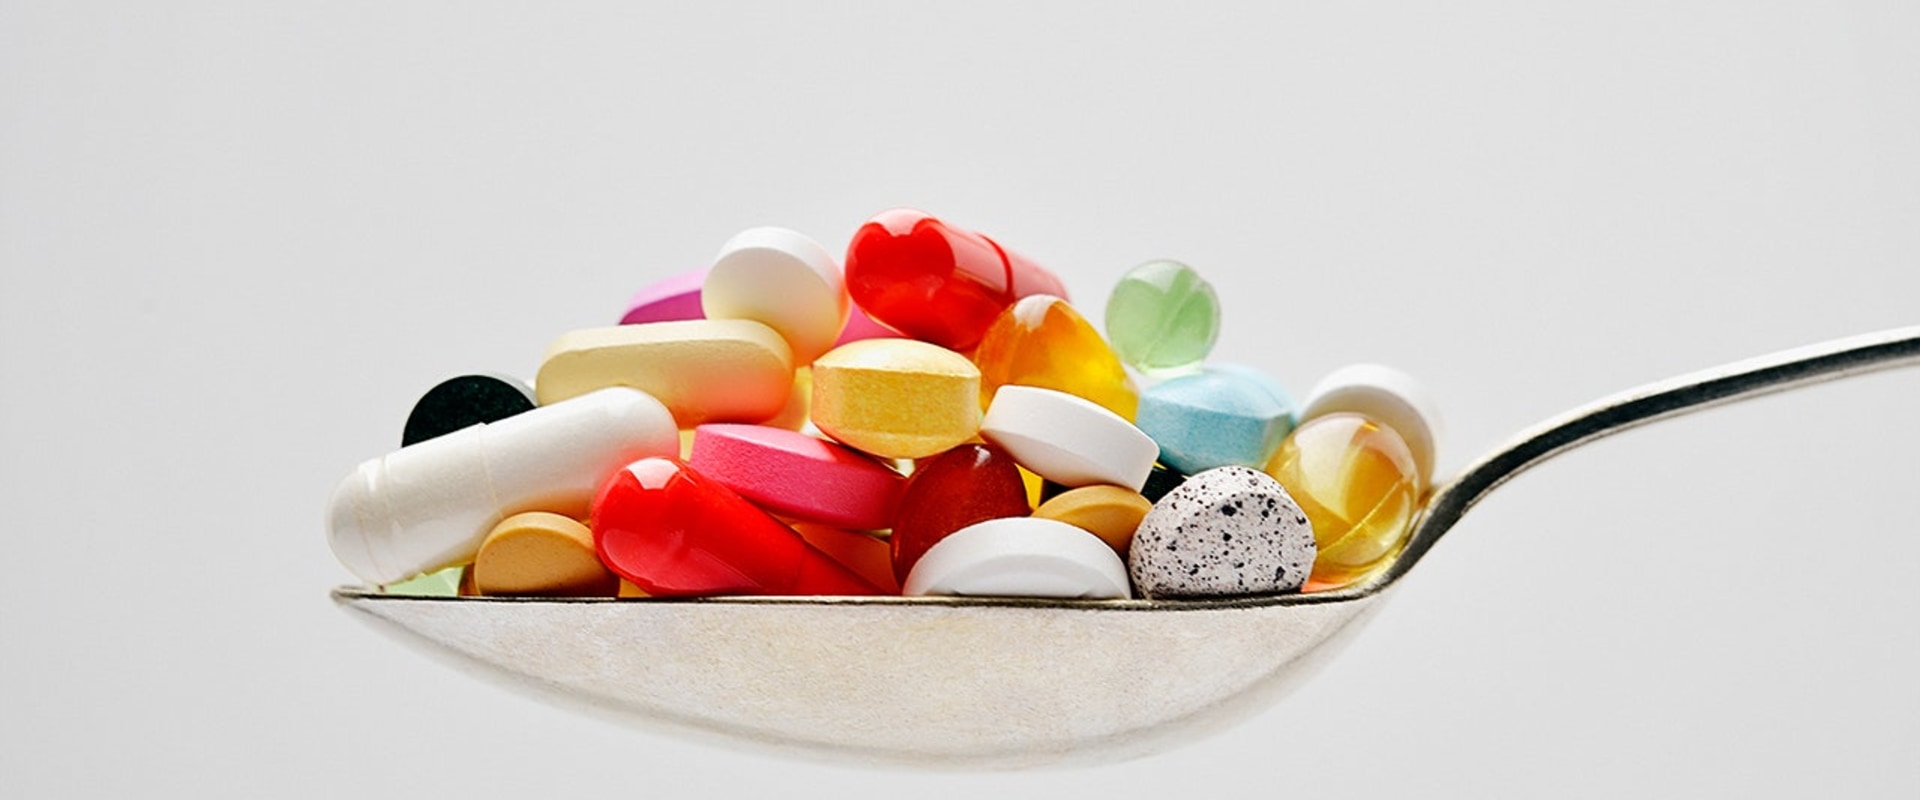 Can natural supplements hurt you?